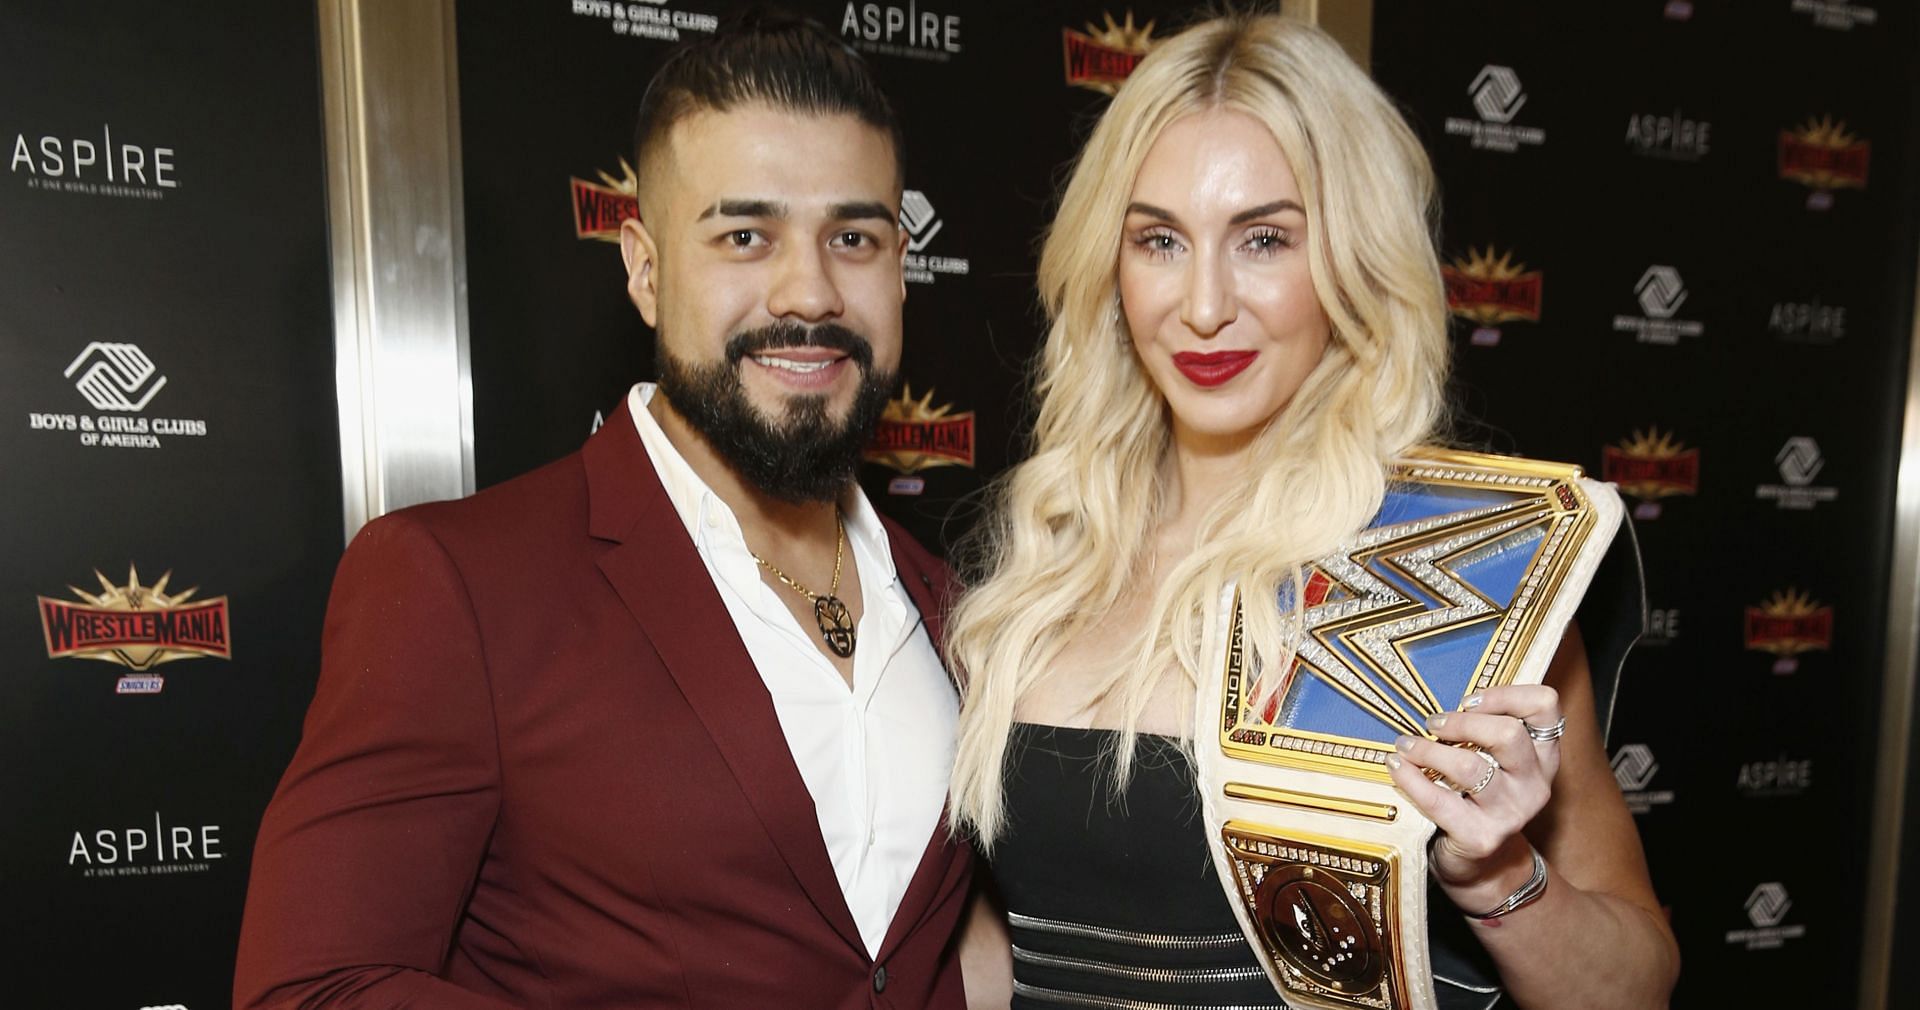 Andrade and Charlotte Flair got married this year